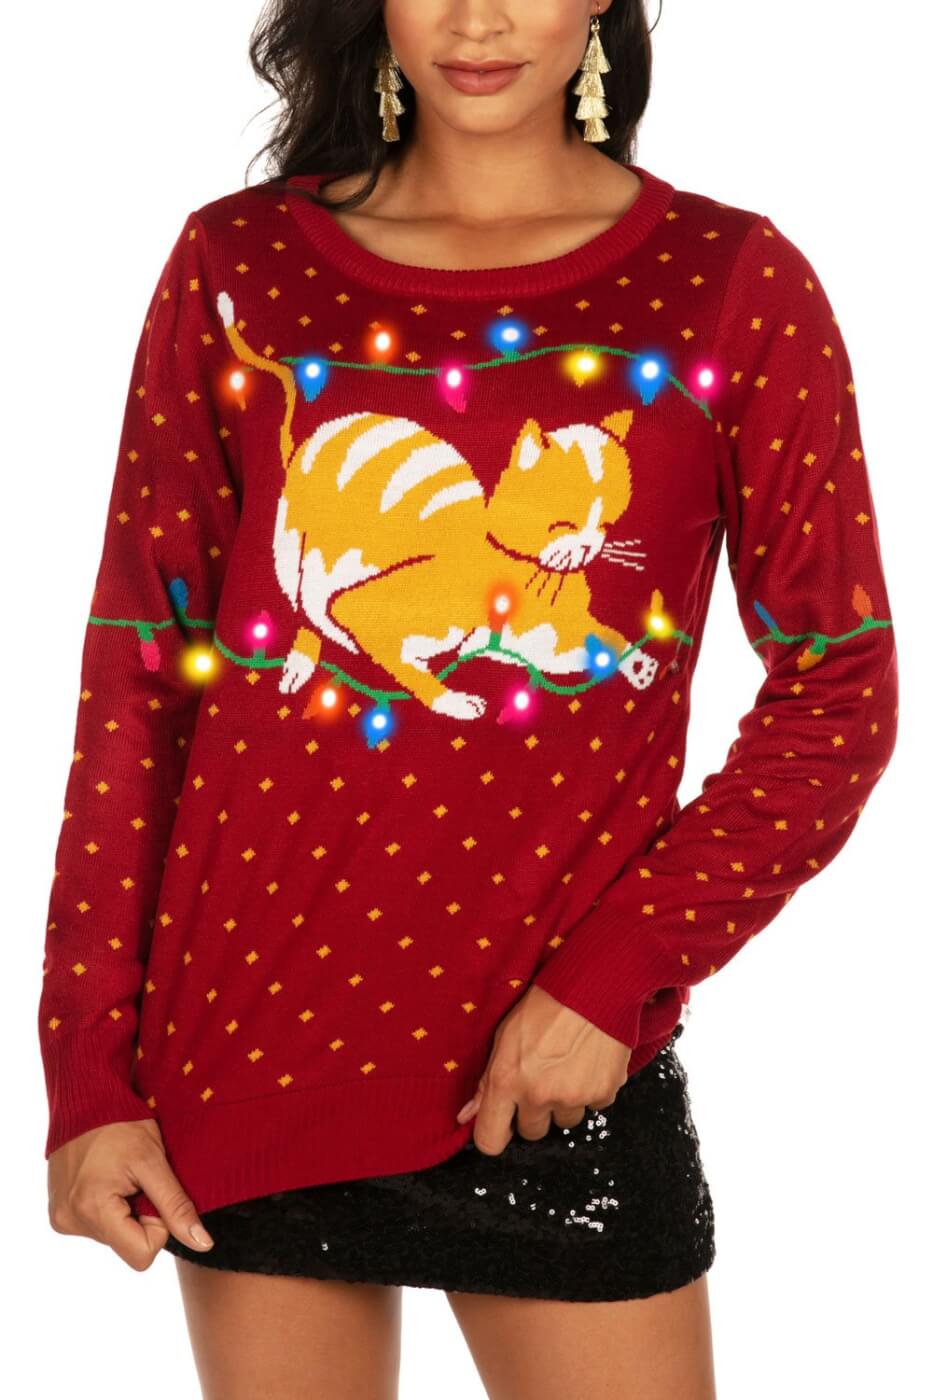 LOSRLY Women Ugly Christmas Sweater Cute Reindeer Hooded Knit Jumper Pullover 